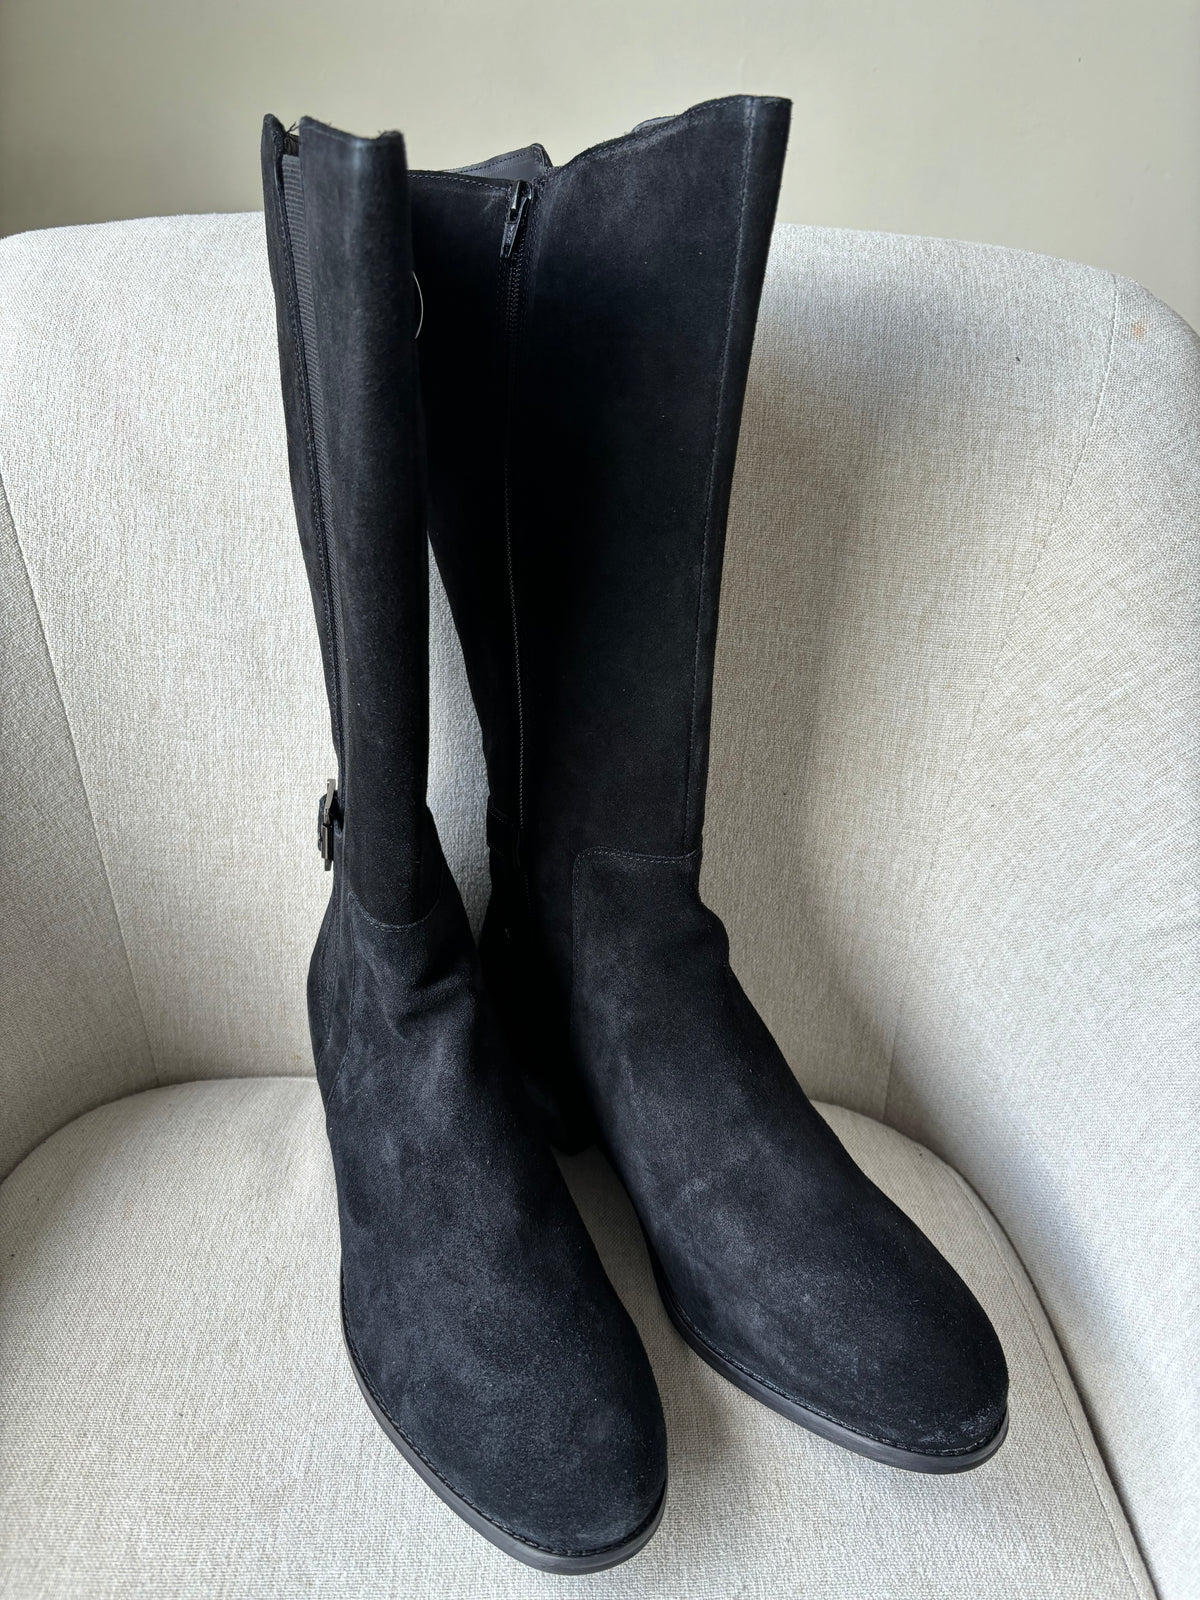 Freemans Wide Fitting Elastic Panel Suede Knee High Boots Size 8